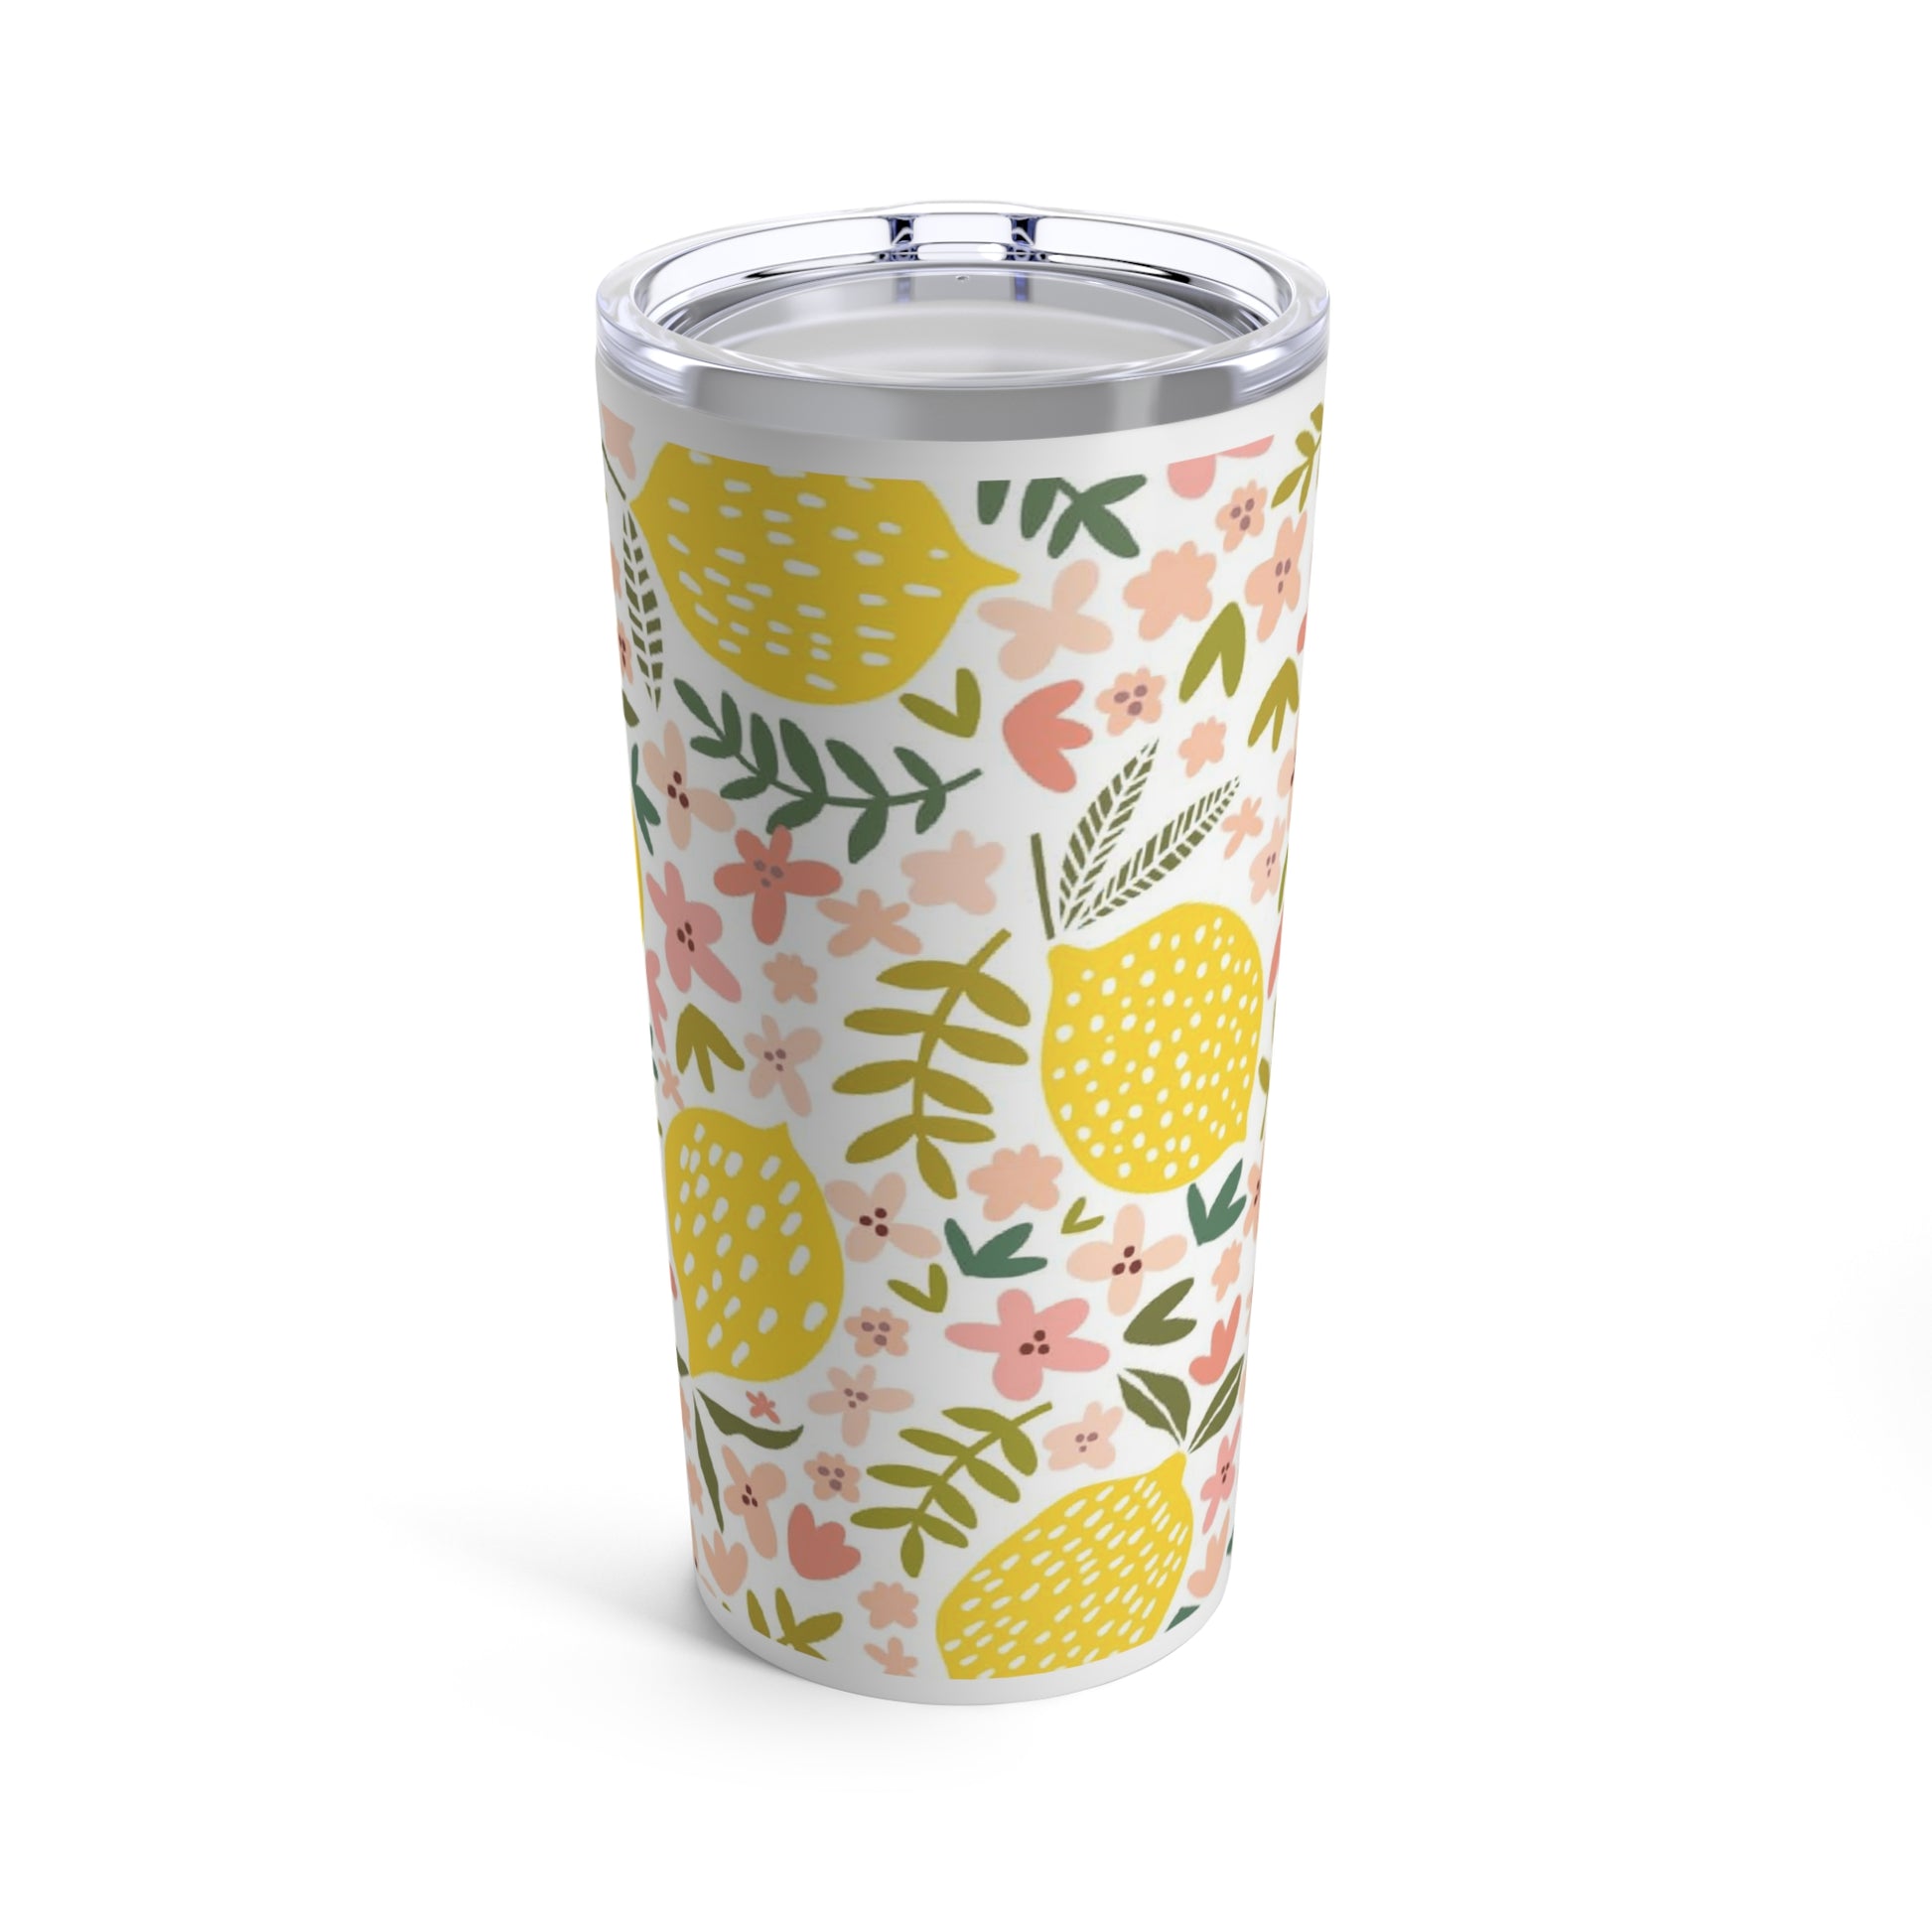 A Printify Pink Lemon Tumbler with a floral pattern and lemons on it, featuring stainless steel construction.